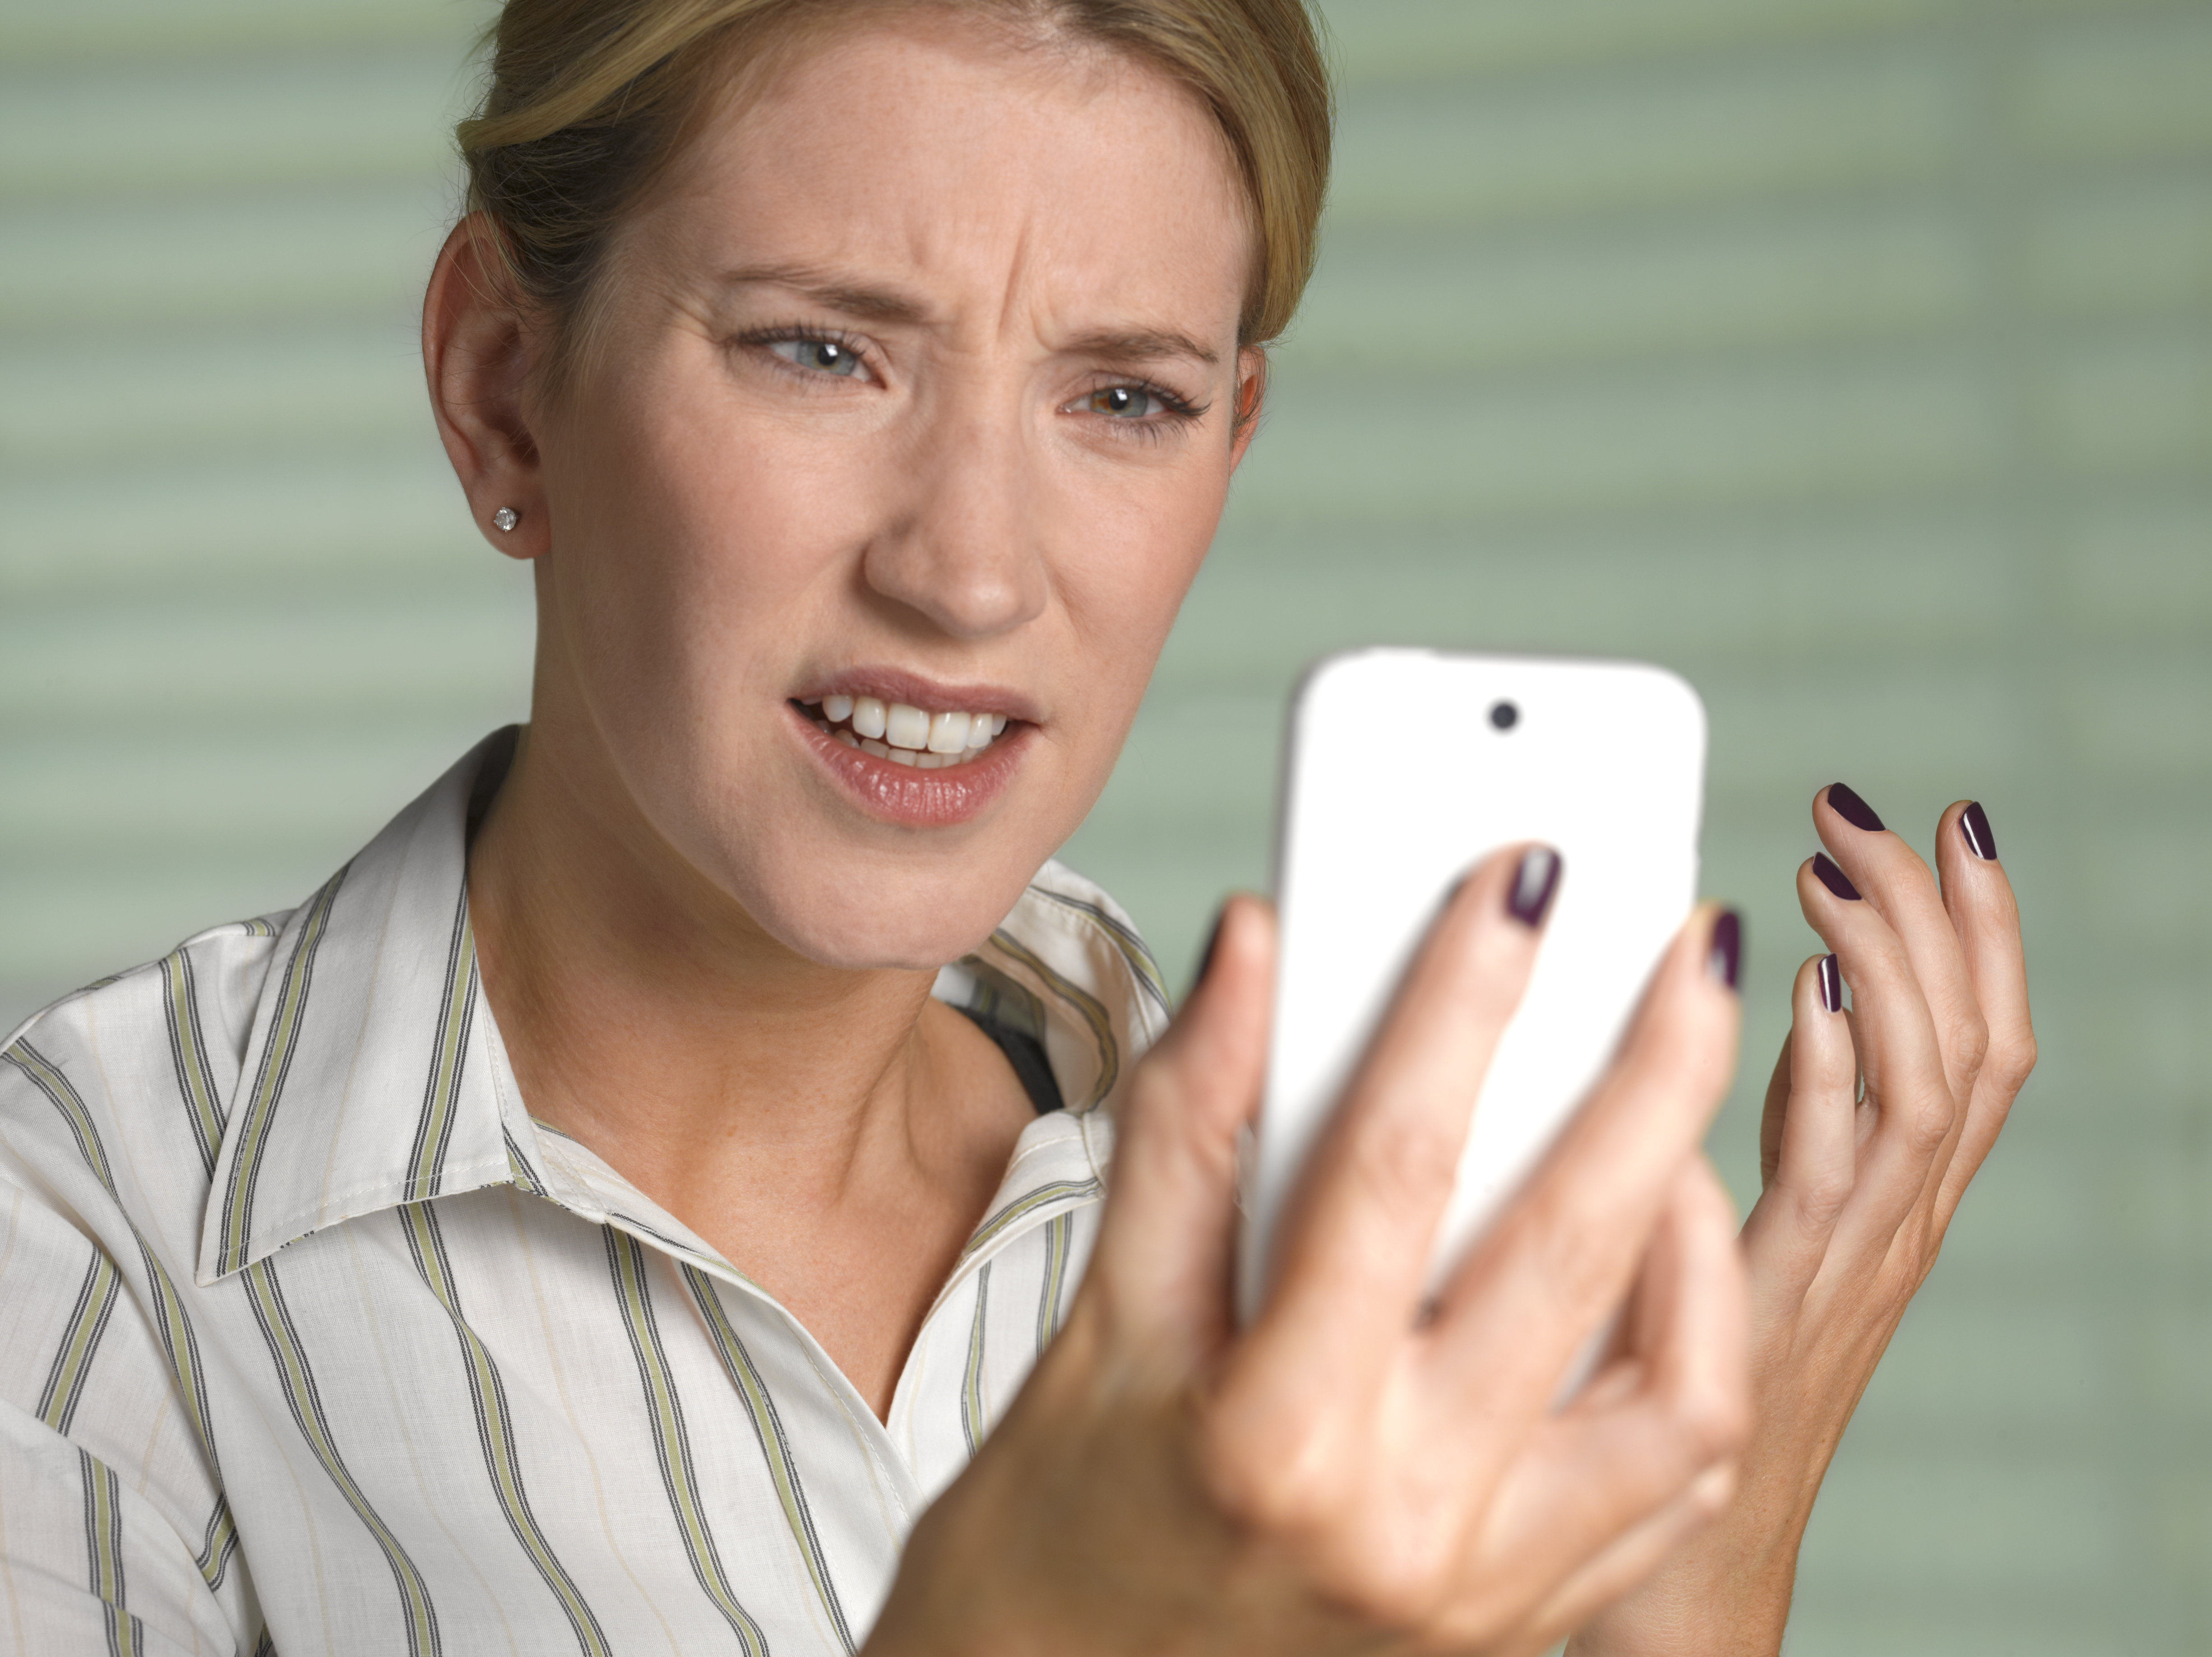 Unhappy woman on smart phone. | Source: Getty Images